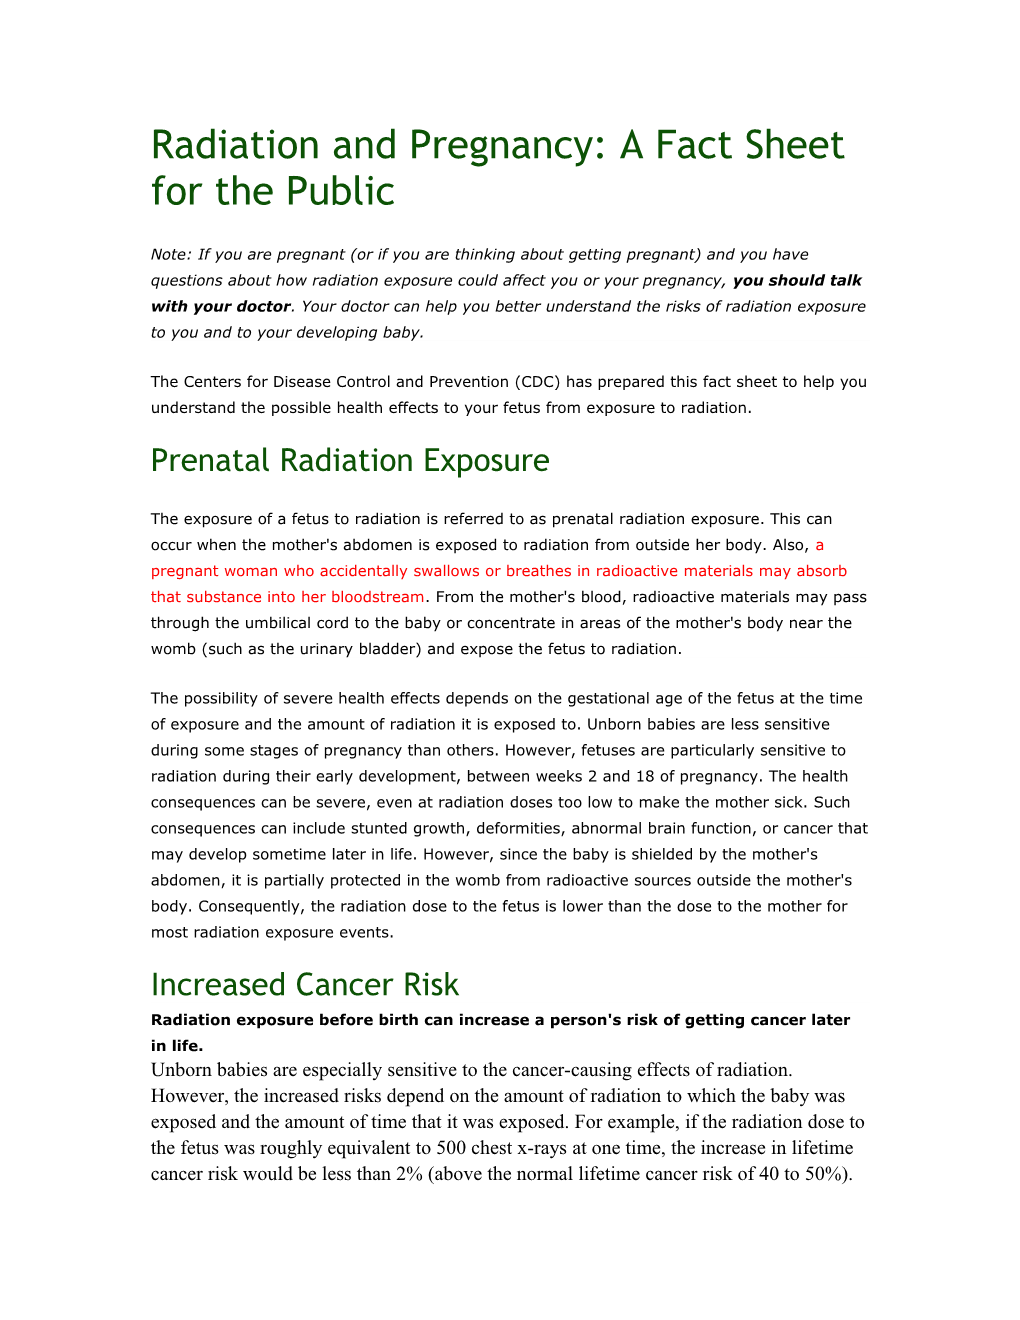 Radiation and Pregnancy: a Fact Sheet for the Public